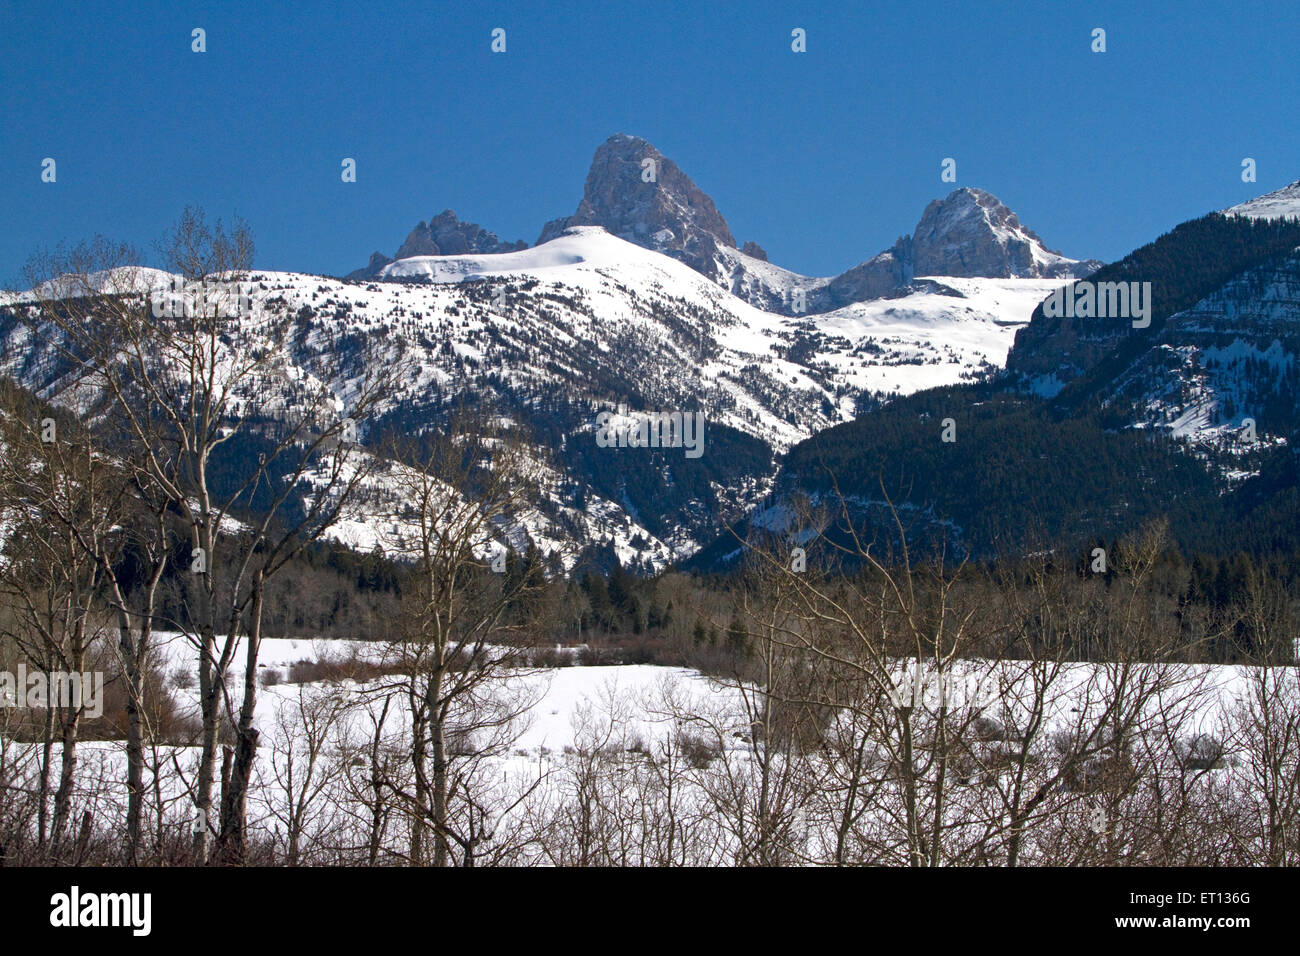 View of the west slope of the Teton Mountain range in Wyoming, USA. Stock Photo